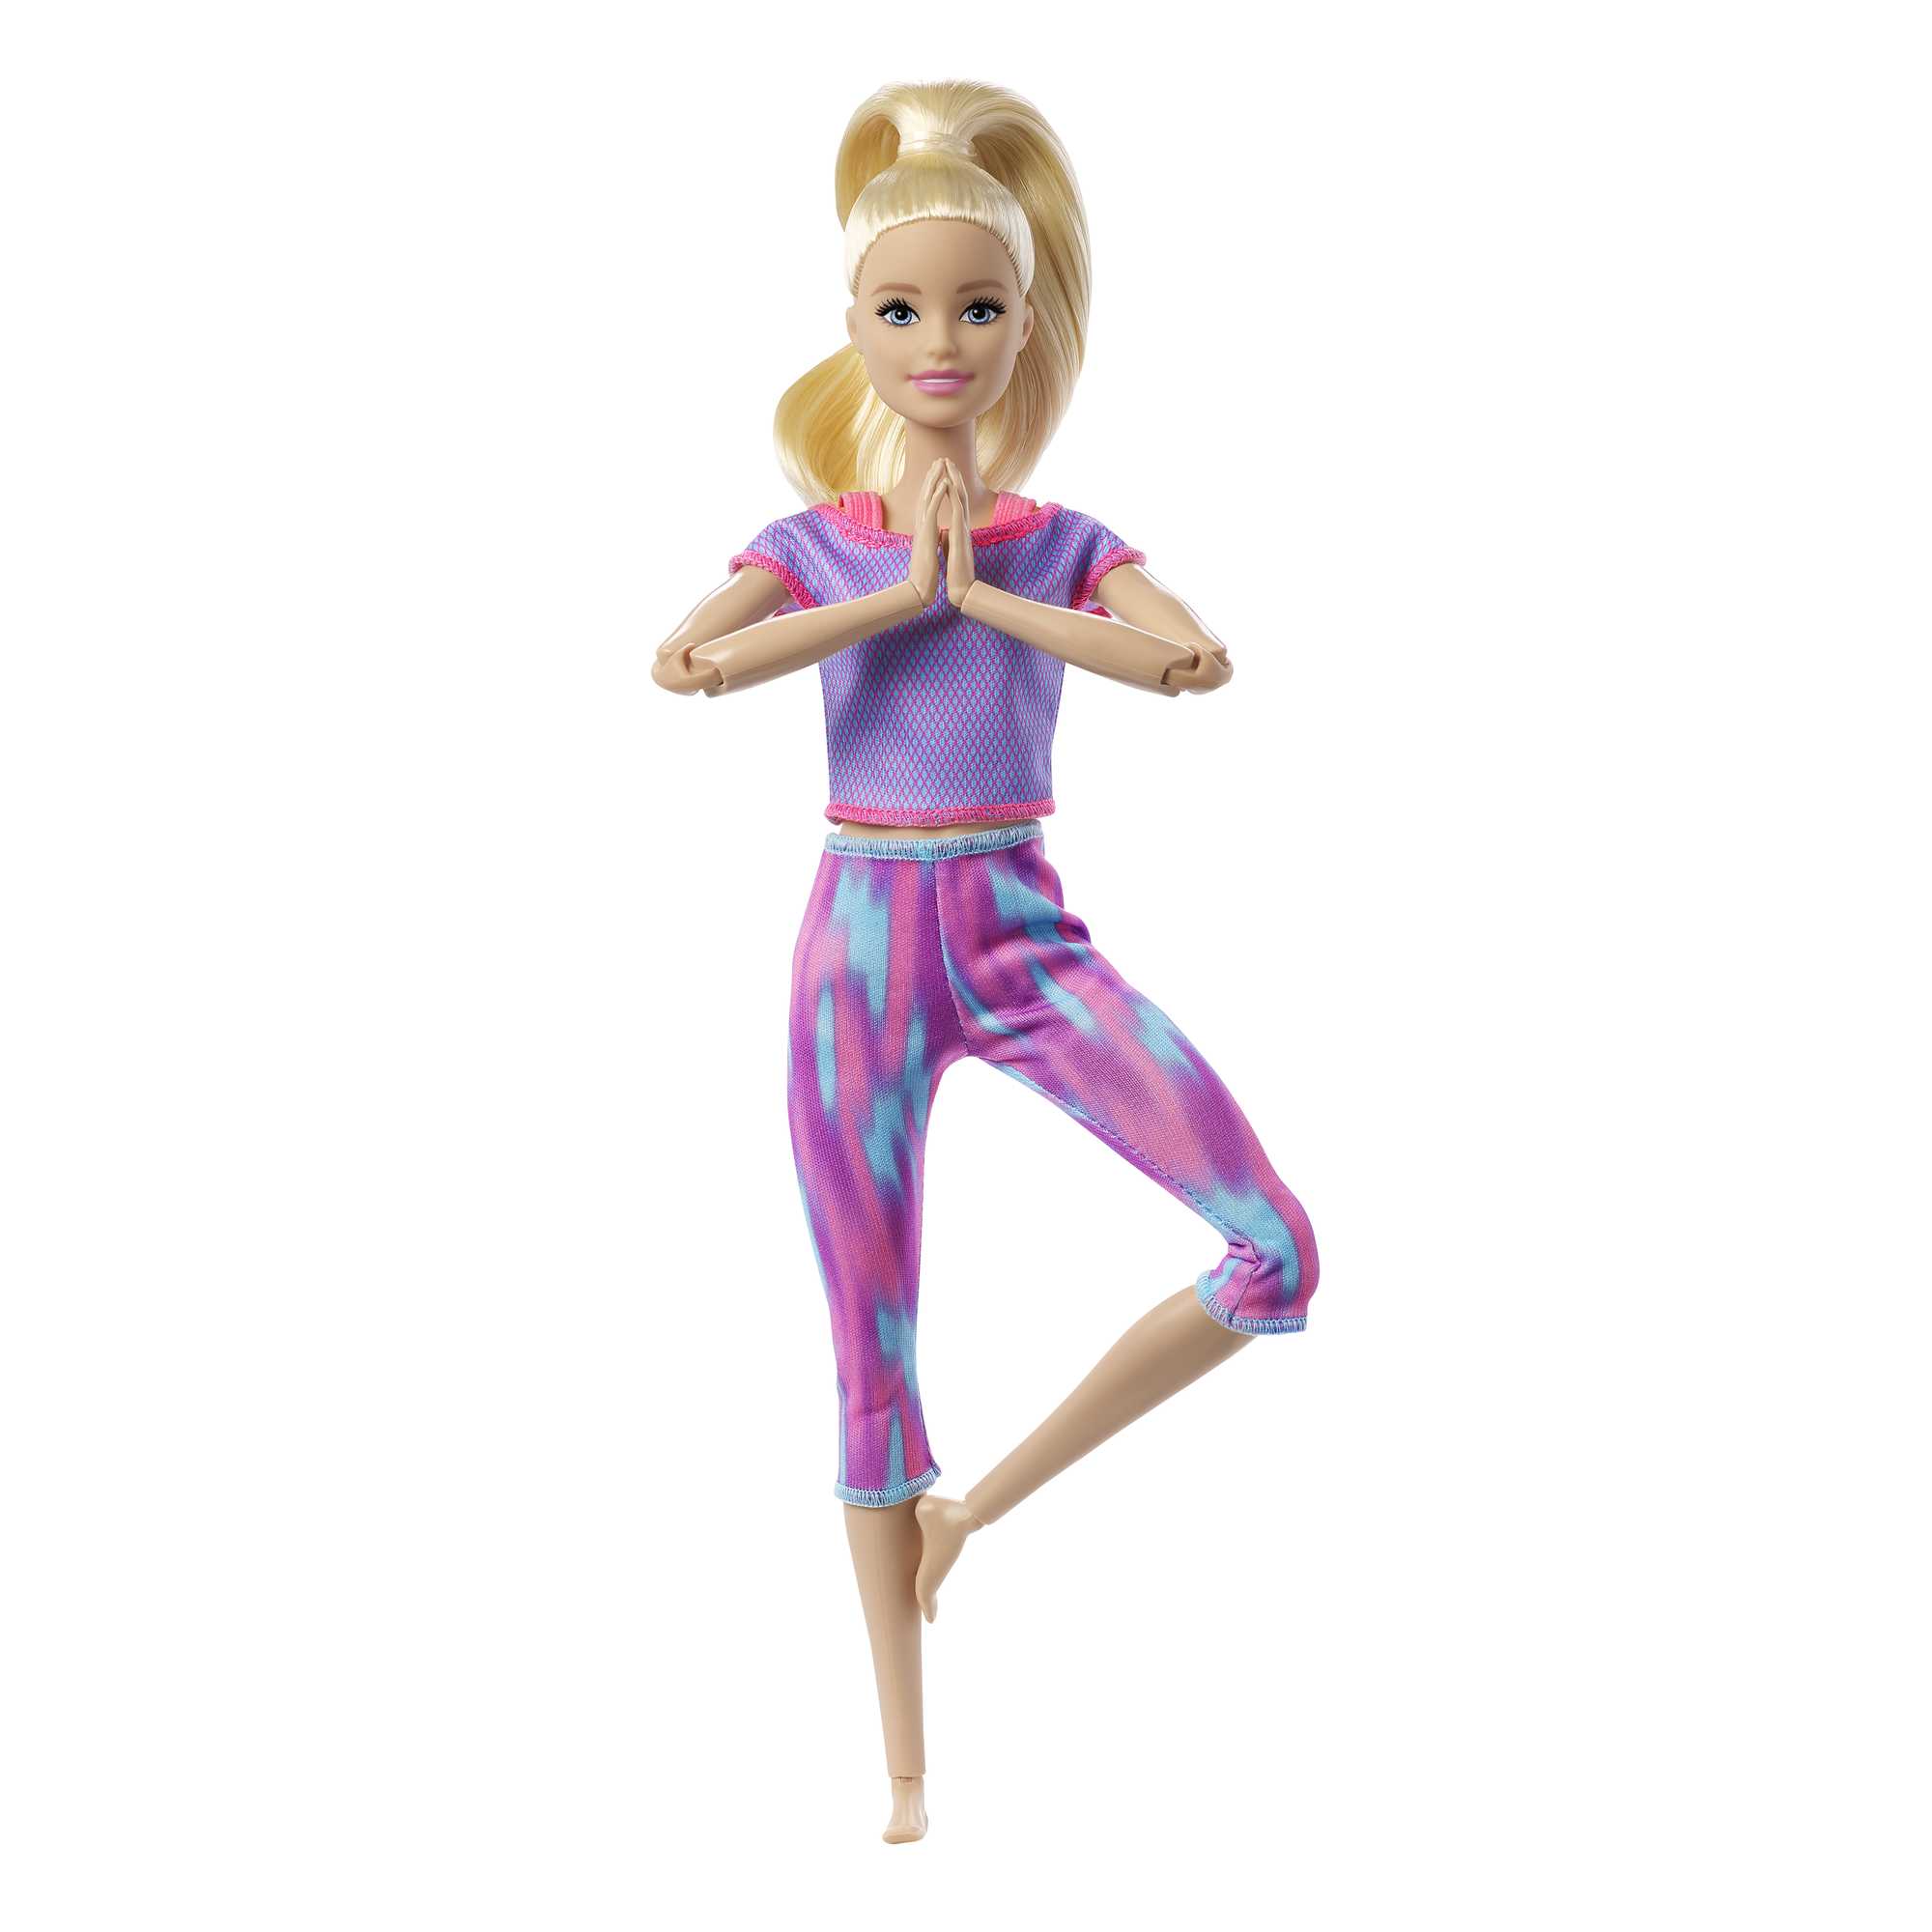 Barbie Made To Move Doll With 22 Flexible Joints & Long Blonde